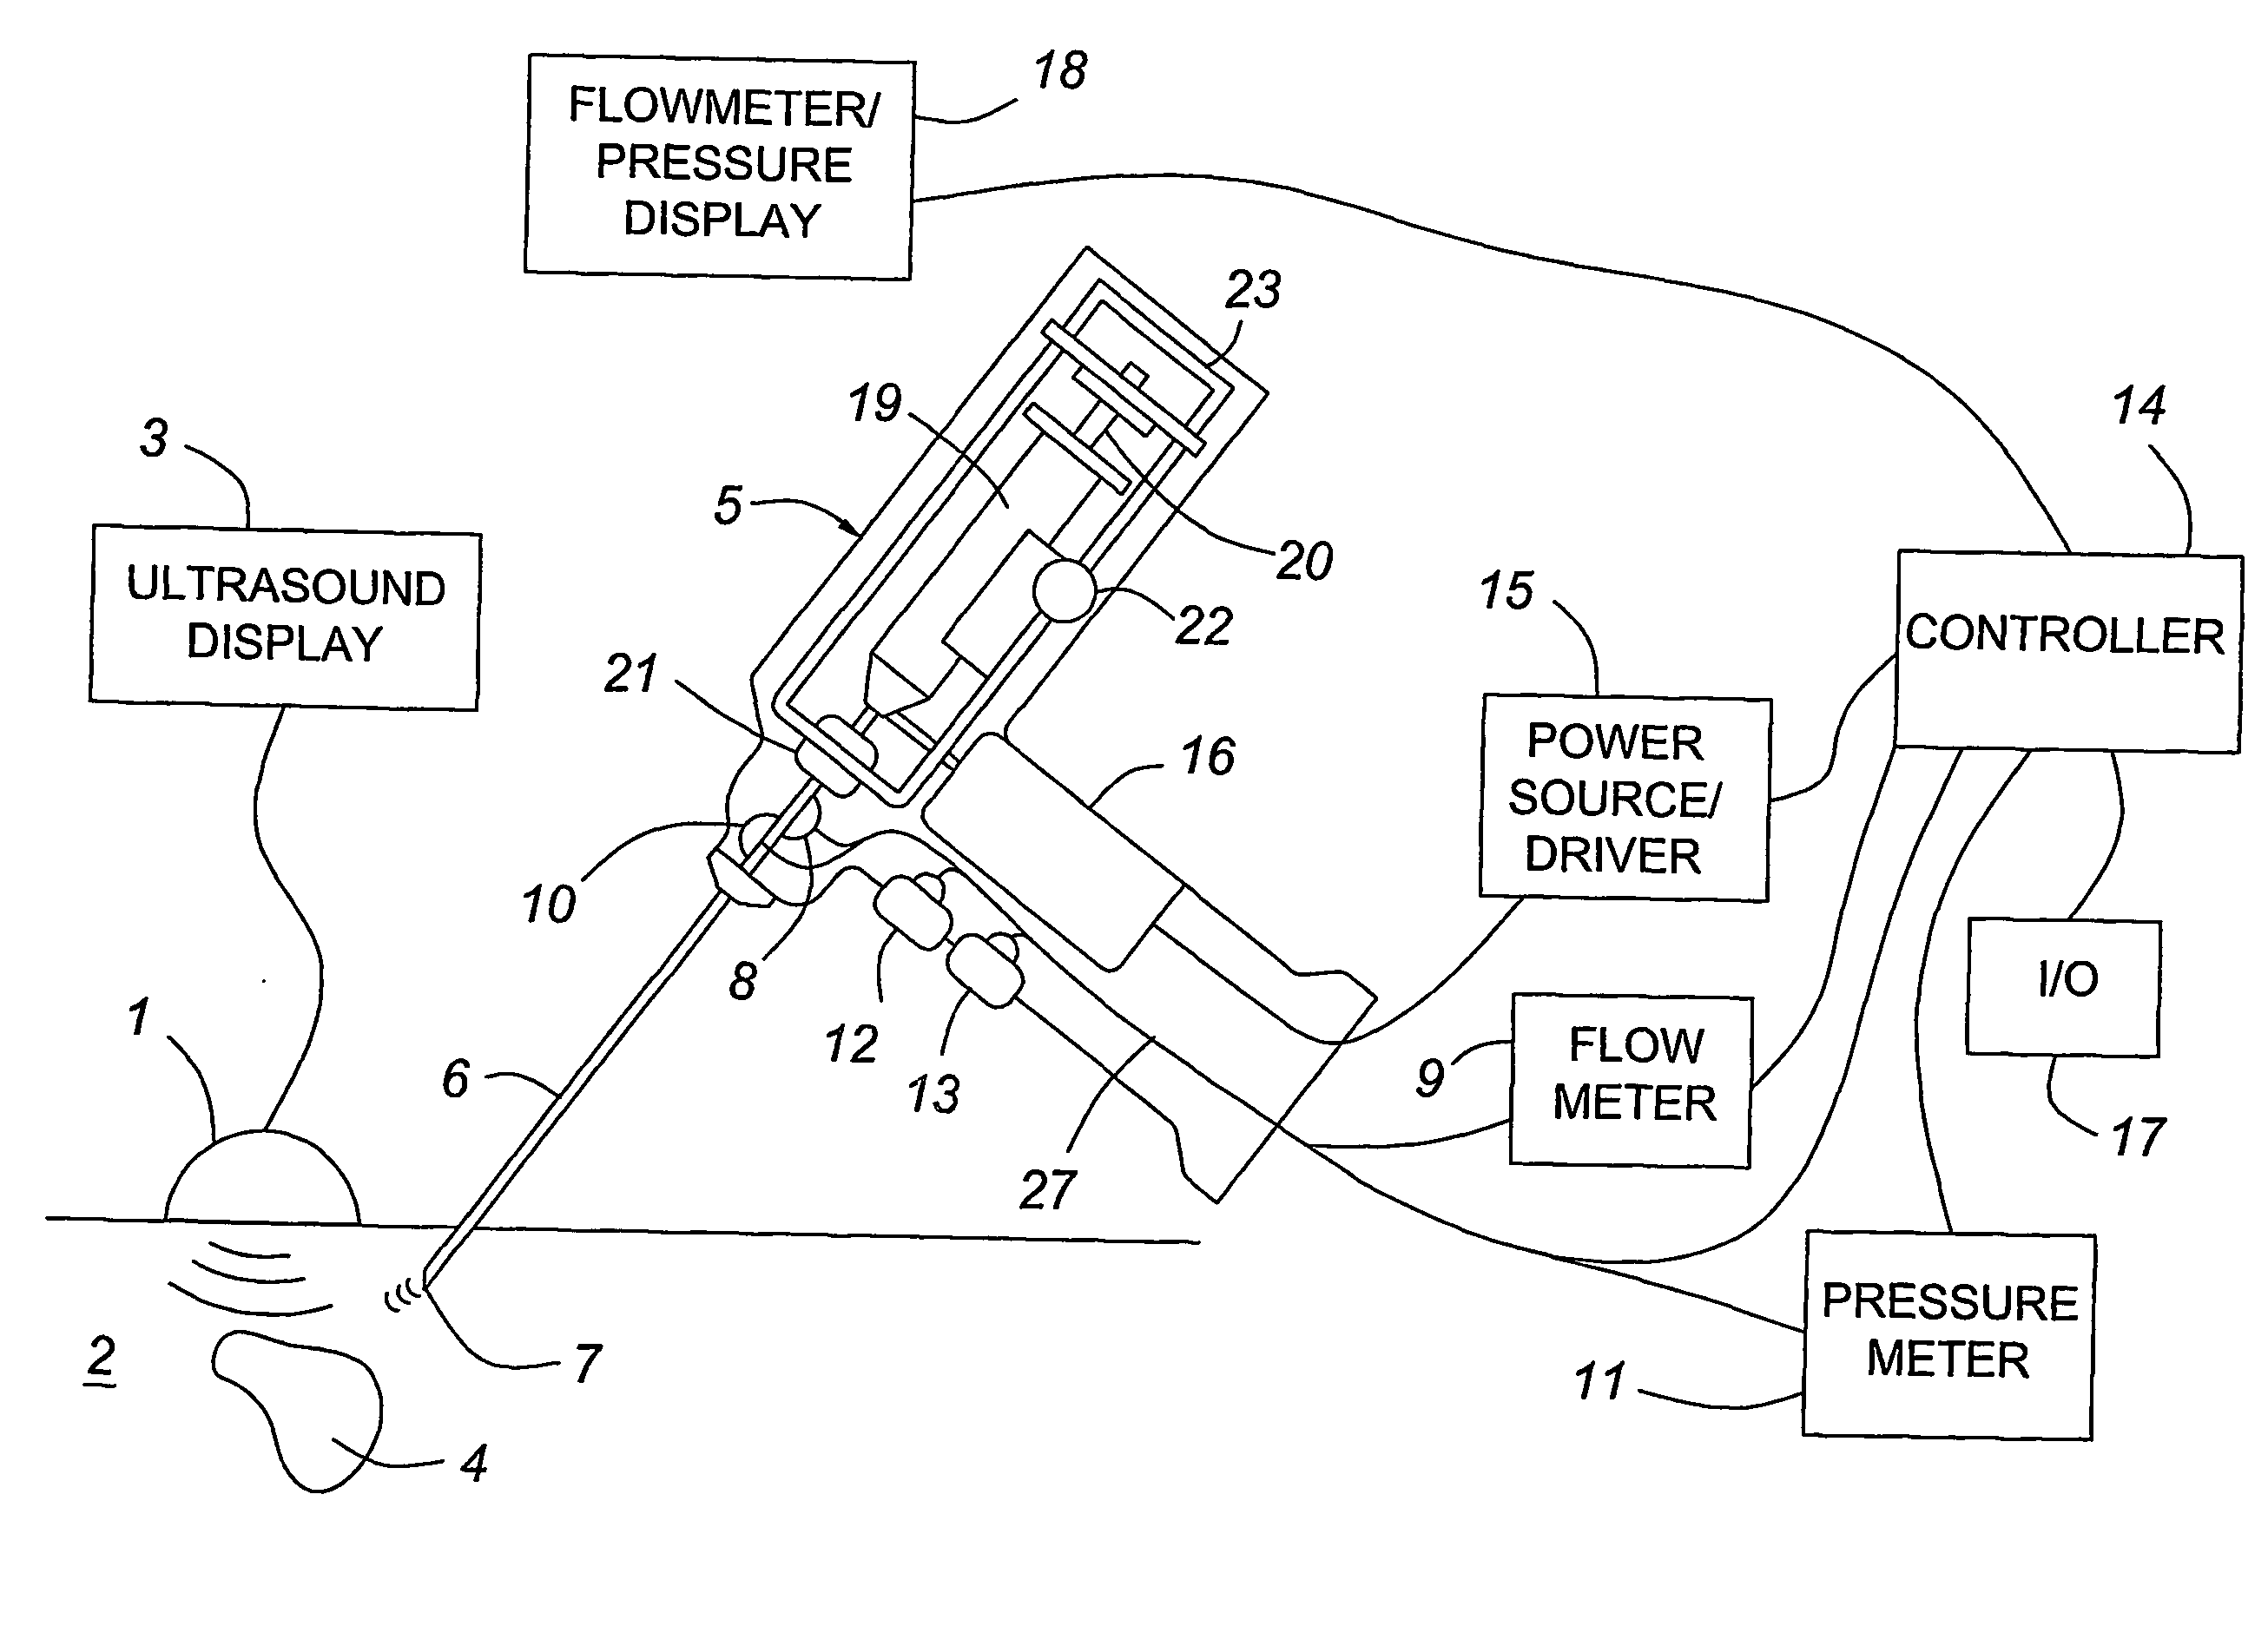 Medical devices with enhanced ultrasonic visibilty